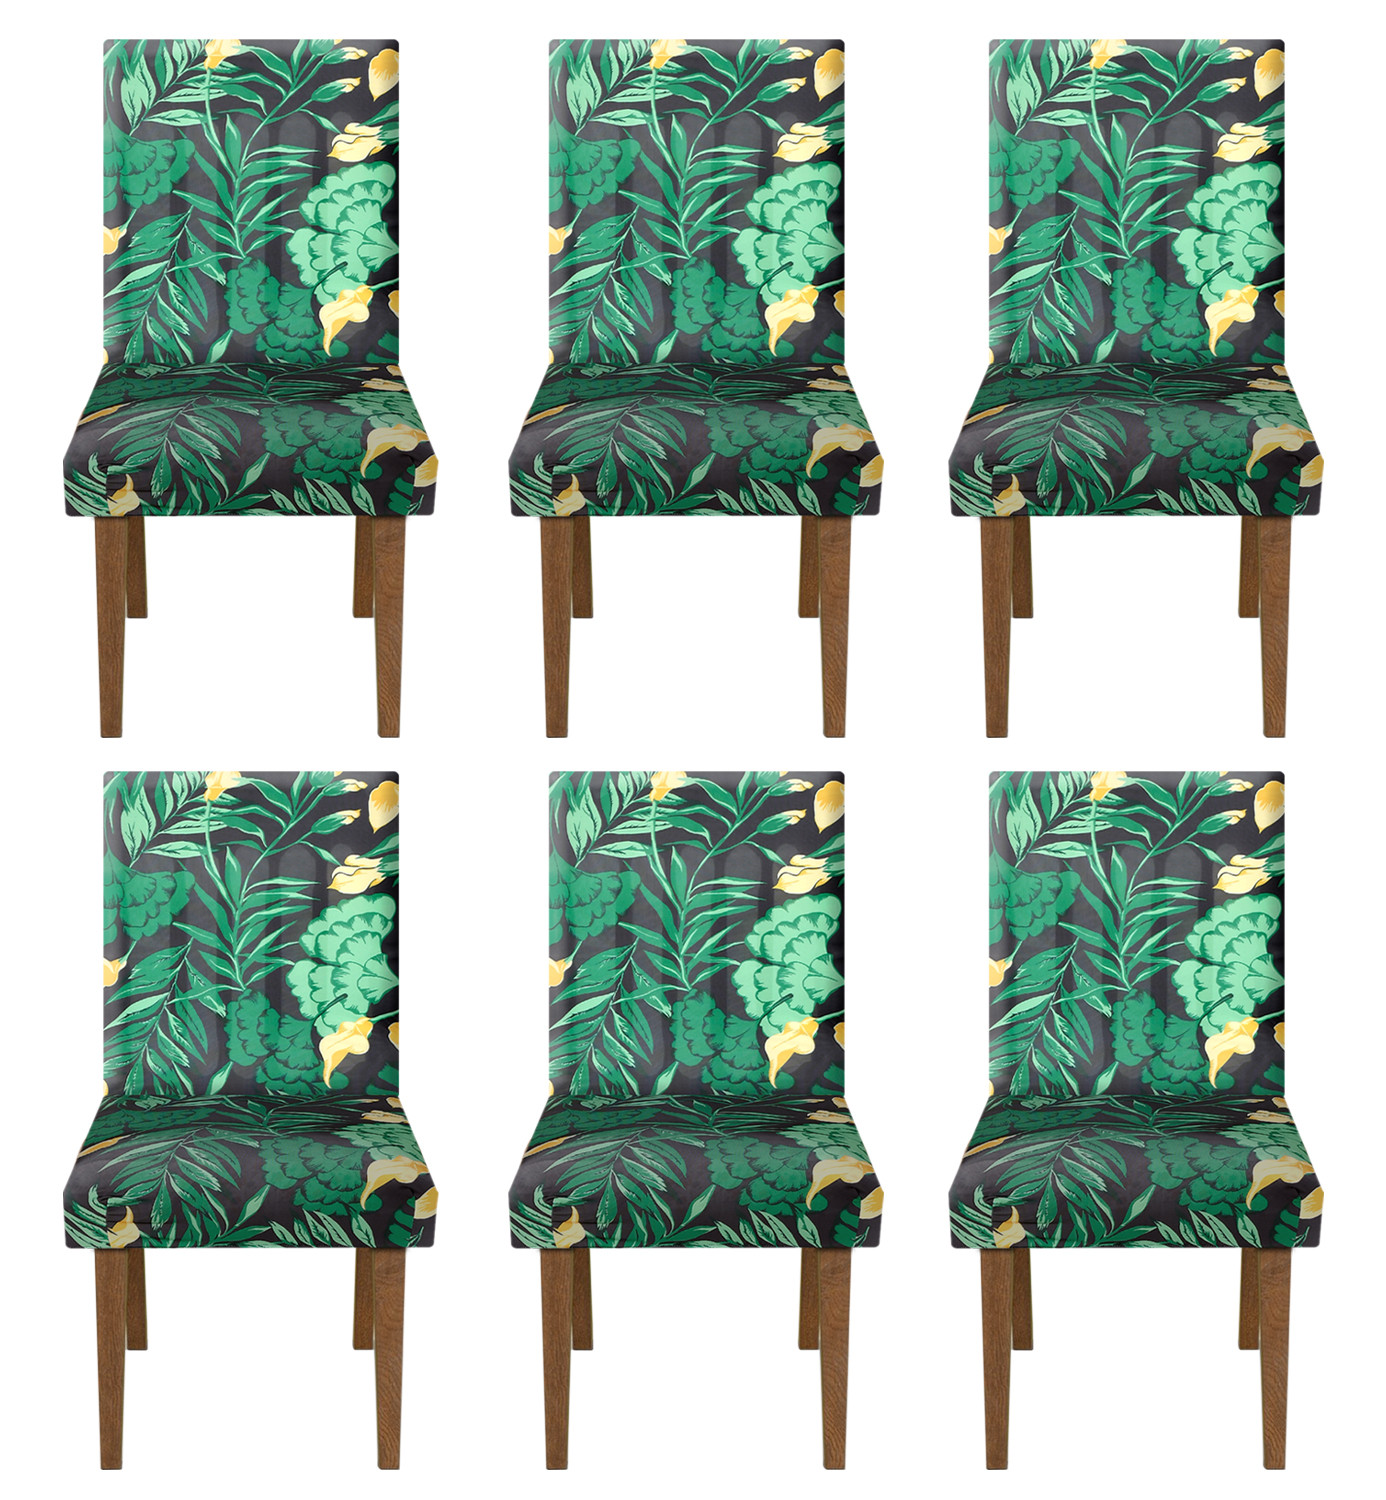 Kuber Industries Flower Printed Elastic Stretchable Polyster Chair Cover For Home, Office, Hotels, Wedding Banquet (Green & Black)